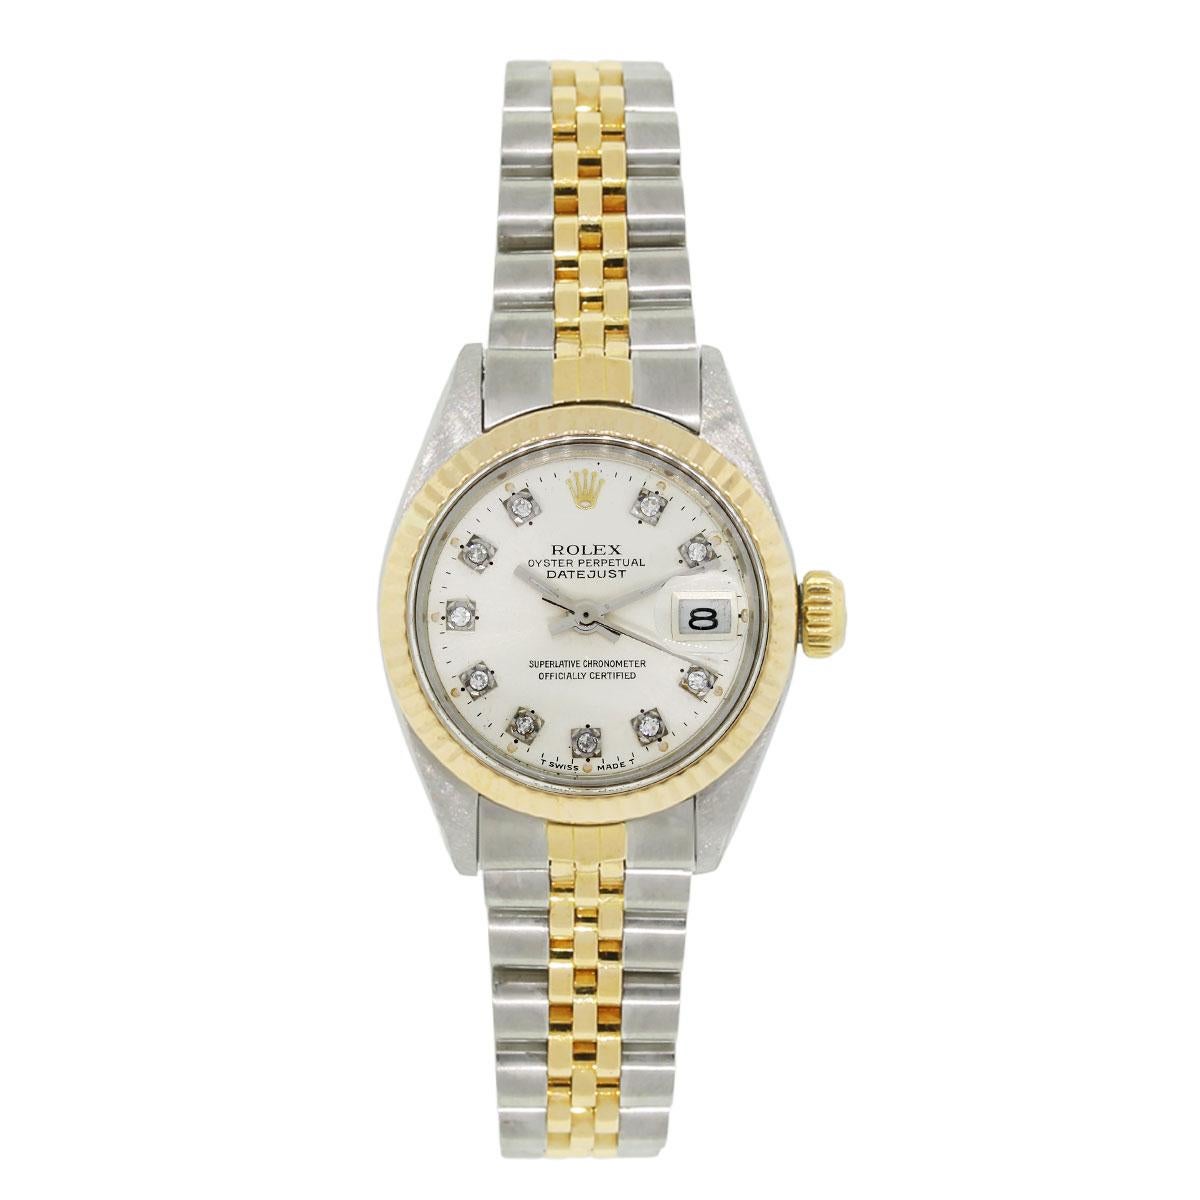 Brand: Rolex
MPN: 6916
Model: Datejust
Case Material: Stainless Steel
Case Diameter: 26mm
Crystal: Scratch resistant sapphire
Bezel: 18k Yellow Gold Fluted Bezel
Dial: Silvered diamond dial with date window at the 3 o’clock position.